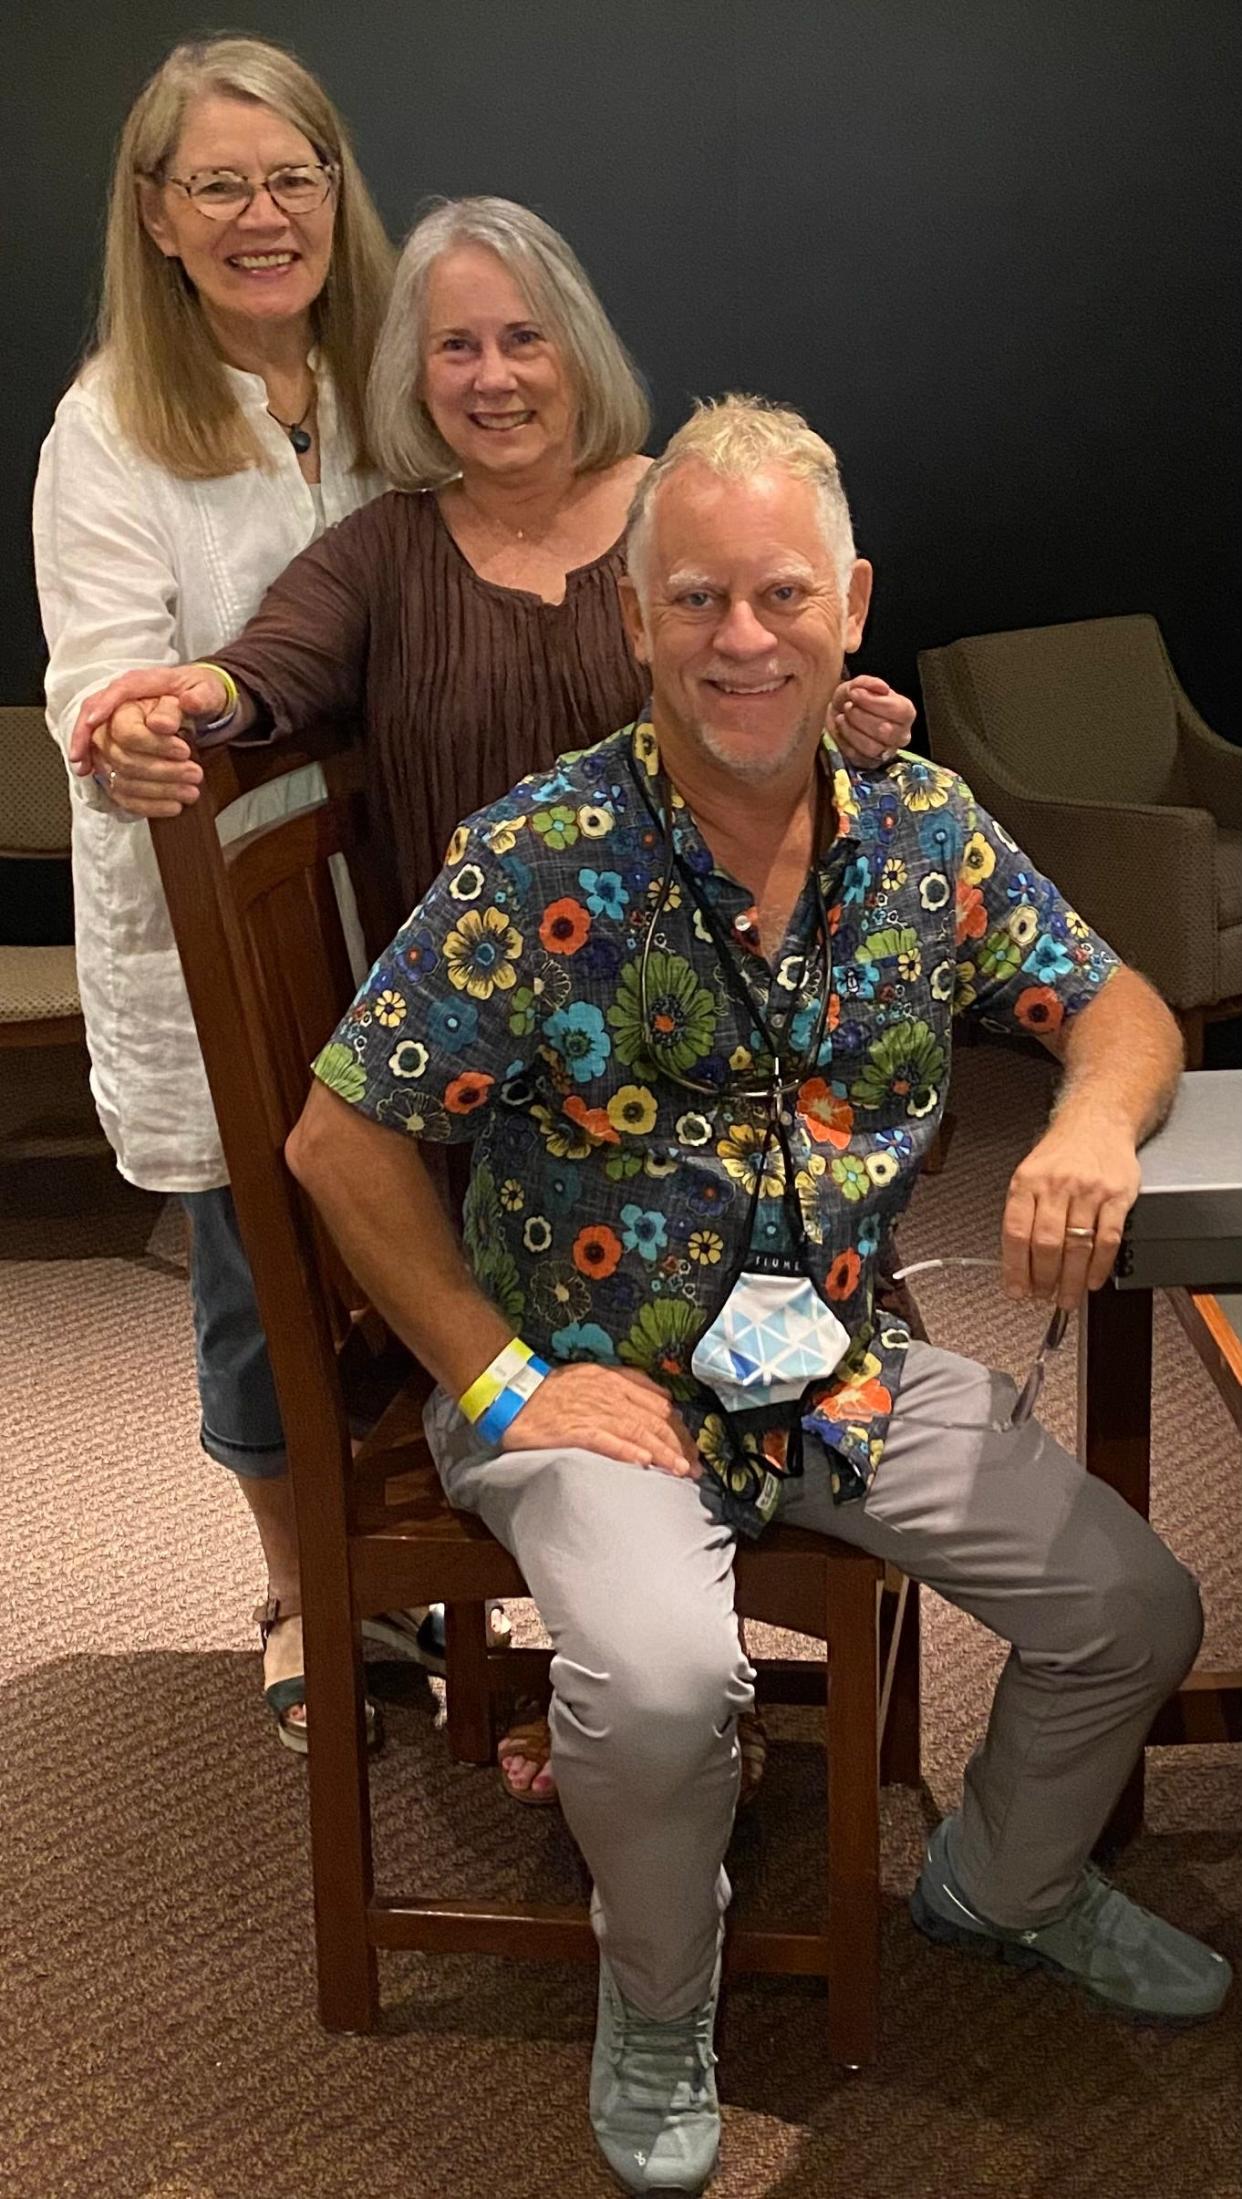 From front to back, Scott Siman, Jaynie Chowning and Kathryn Ledbetter pose for a photo. Siman and Ledbetter co-authored "Broadcasting the Ozarks: Si Siman and Country Music at the Crossroads."